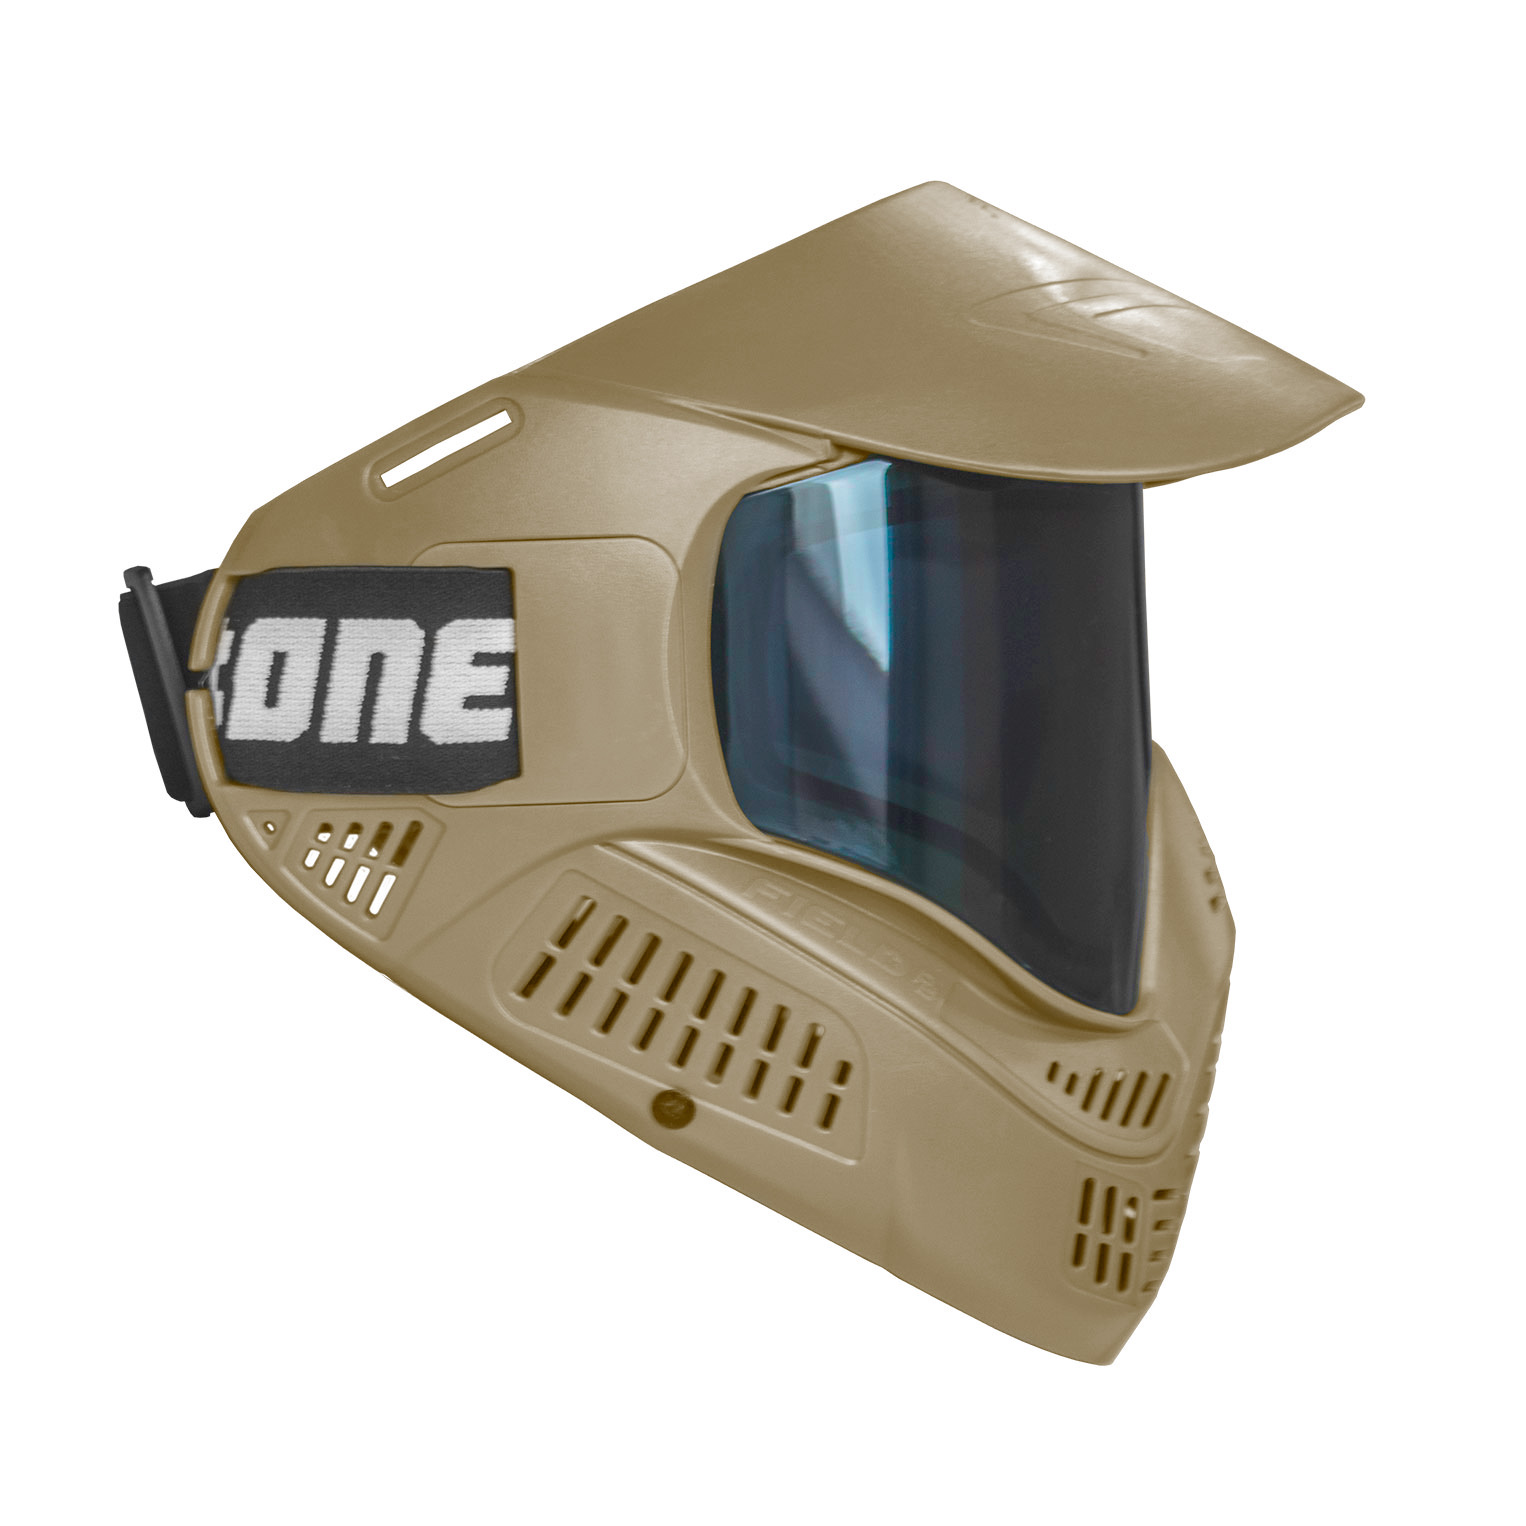 FIELDpb ONE Goggle Desert Tan (Thermal Lens)